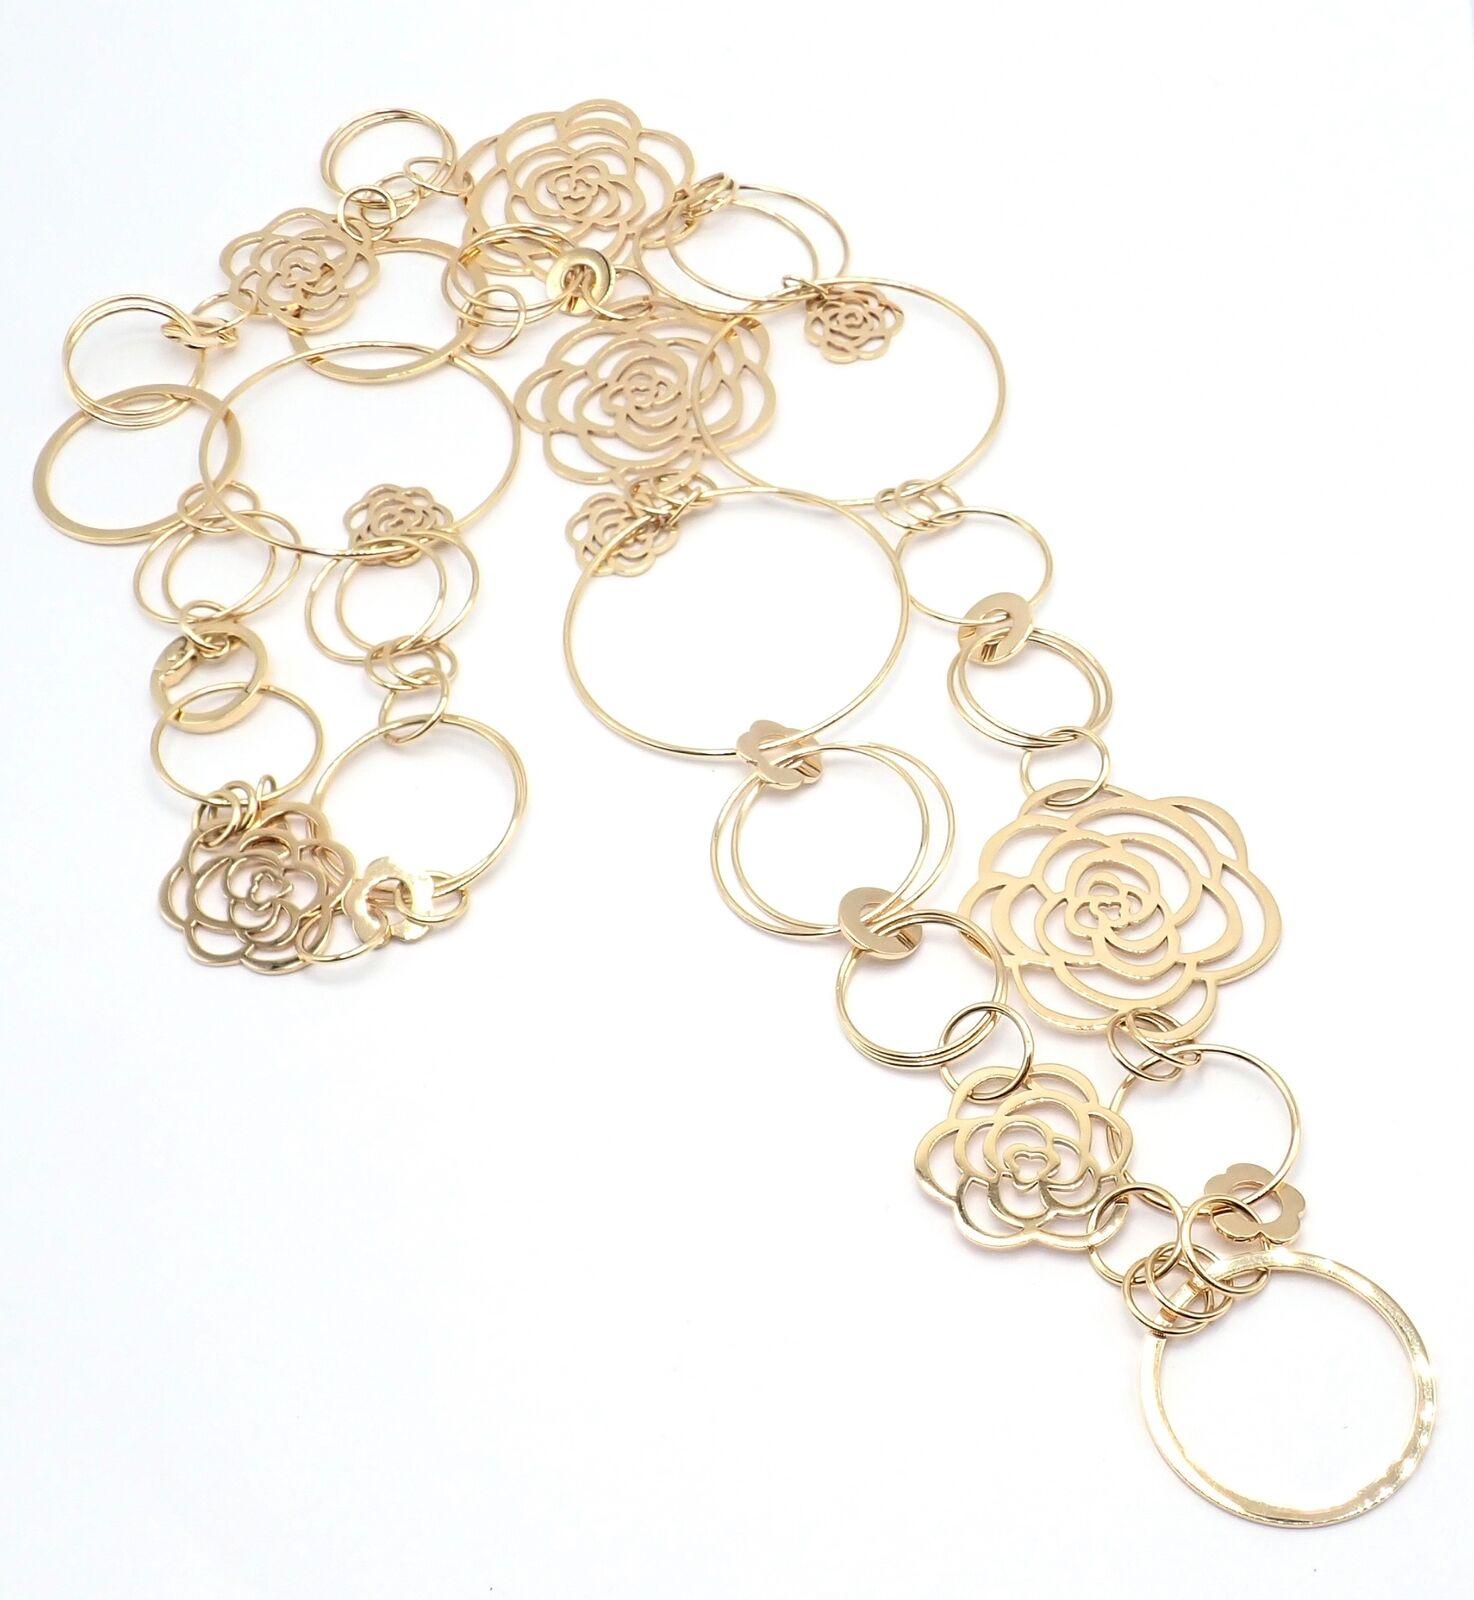 18k Yellow Gold Camélia Camellia Sautoir Flower Large Version Long Link Necklace by Chanel. 
This necklace comes with original box and a certificate of authenticity.
Details: 
Length: 32